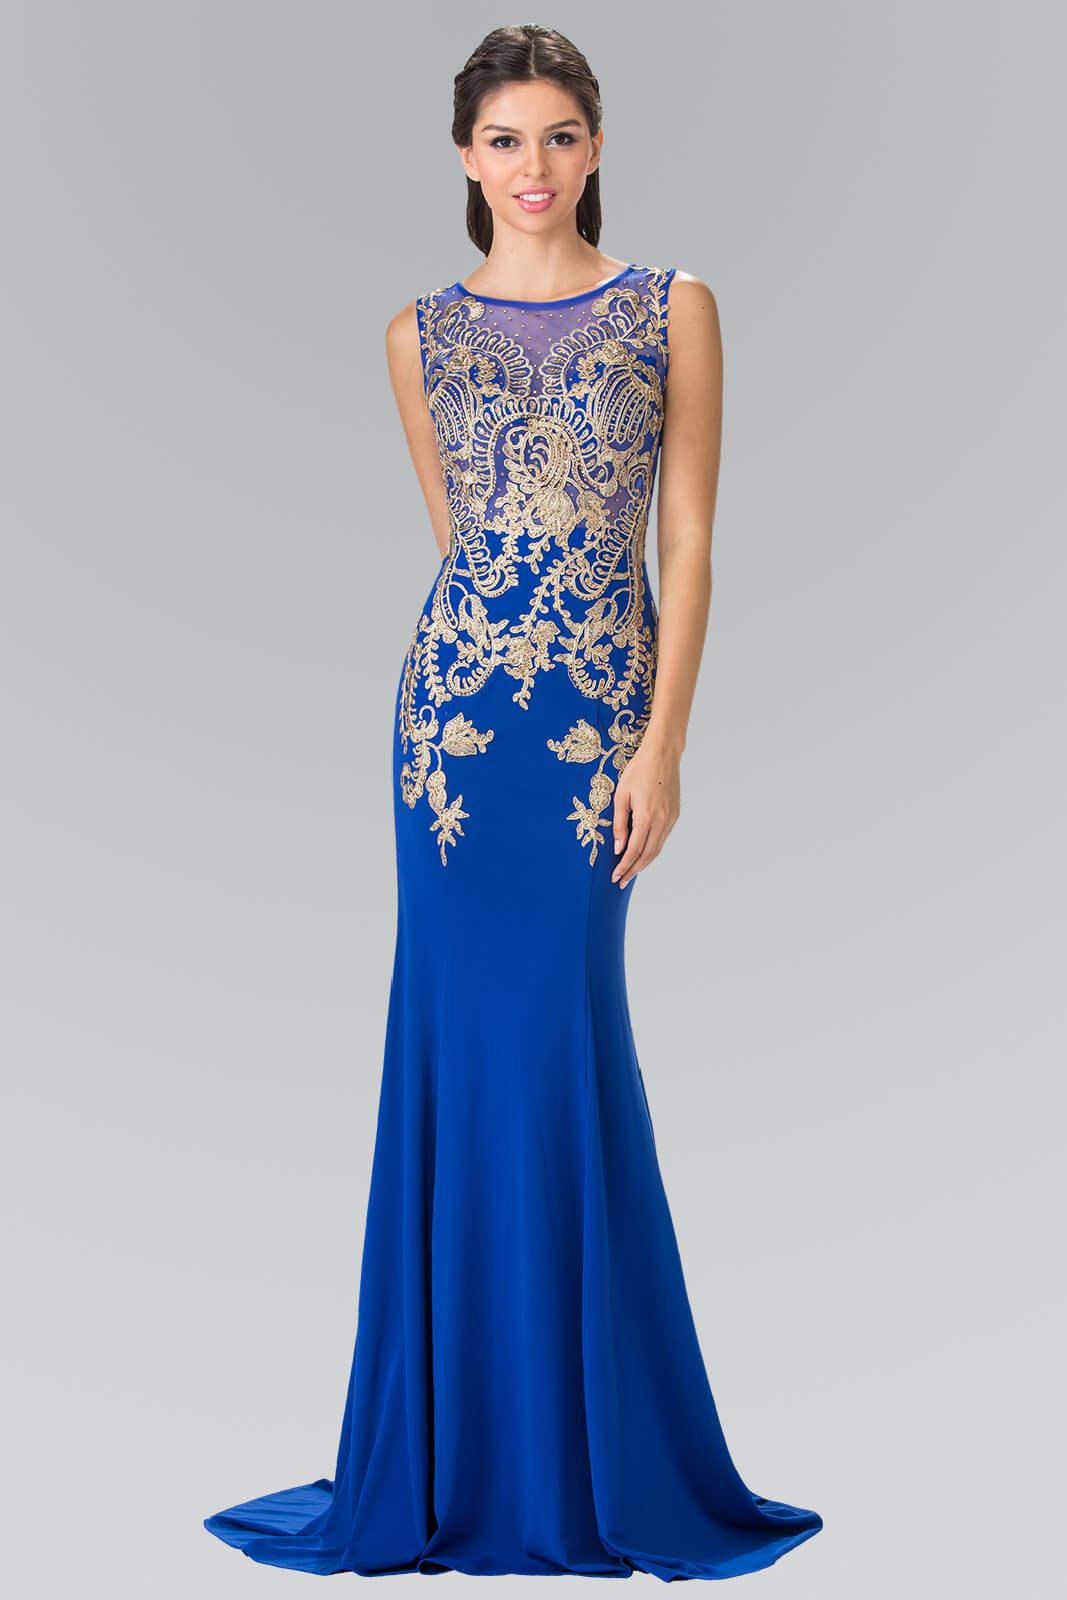 Prom Beaded Top Sheer Bodice Evening Gown - The Dress Outlet Elizabeth K